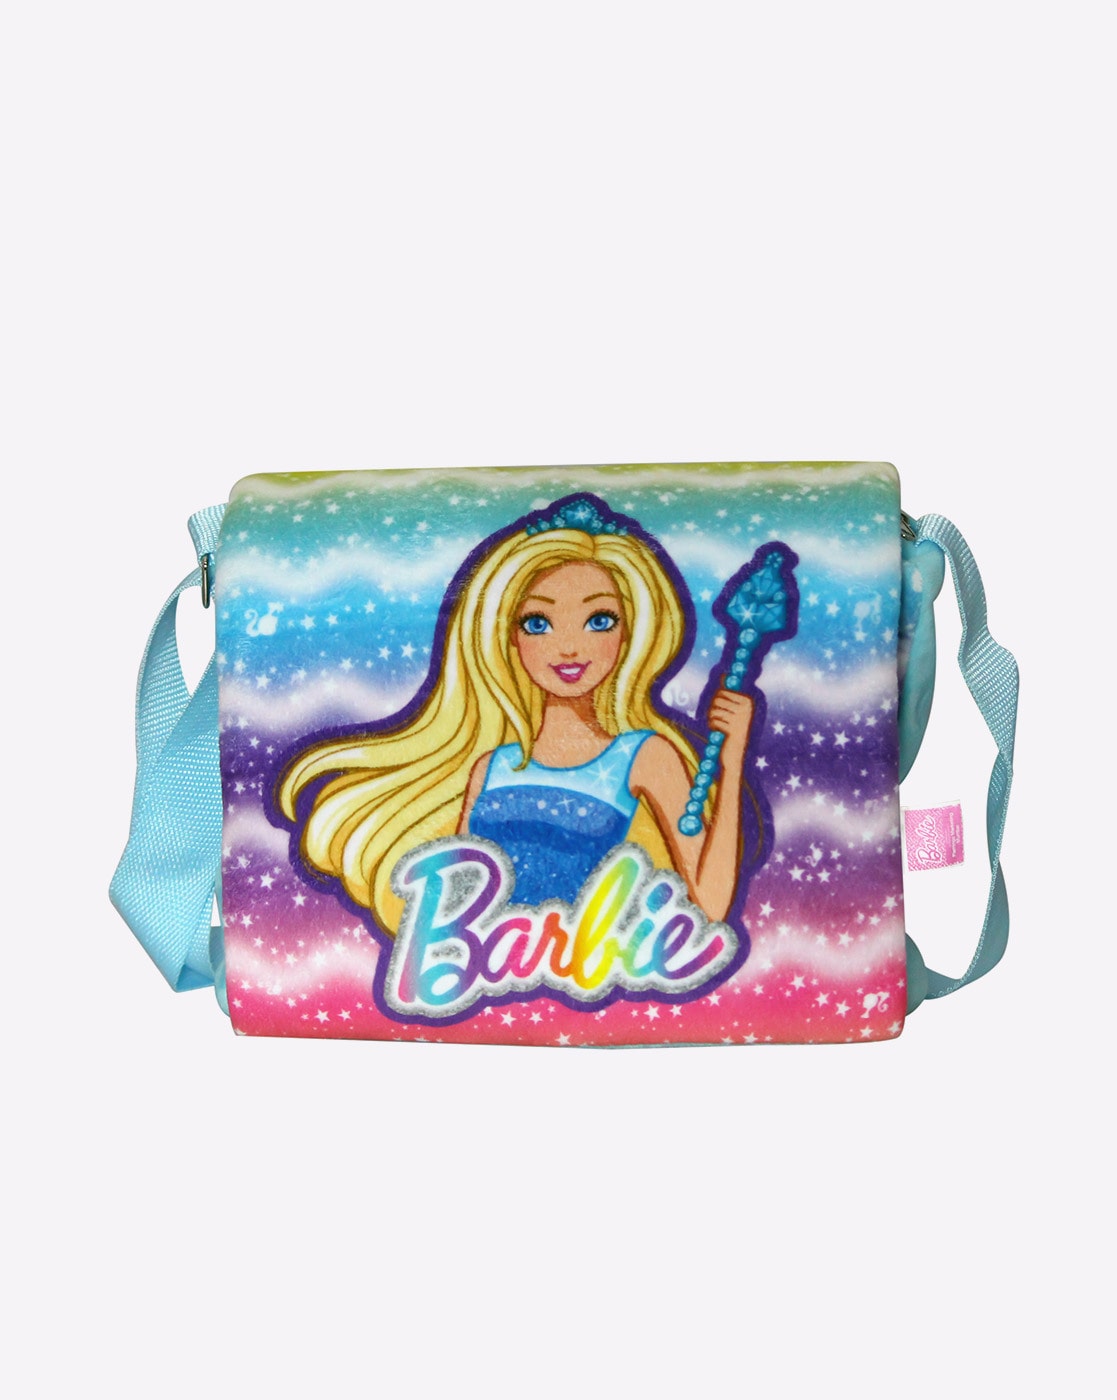 Buy Stylbase Lightweight Barbie 3D Effect School Bag for Kids(Multicolor)  at Amazon.in